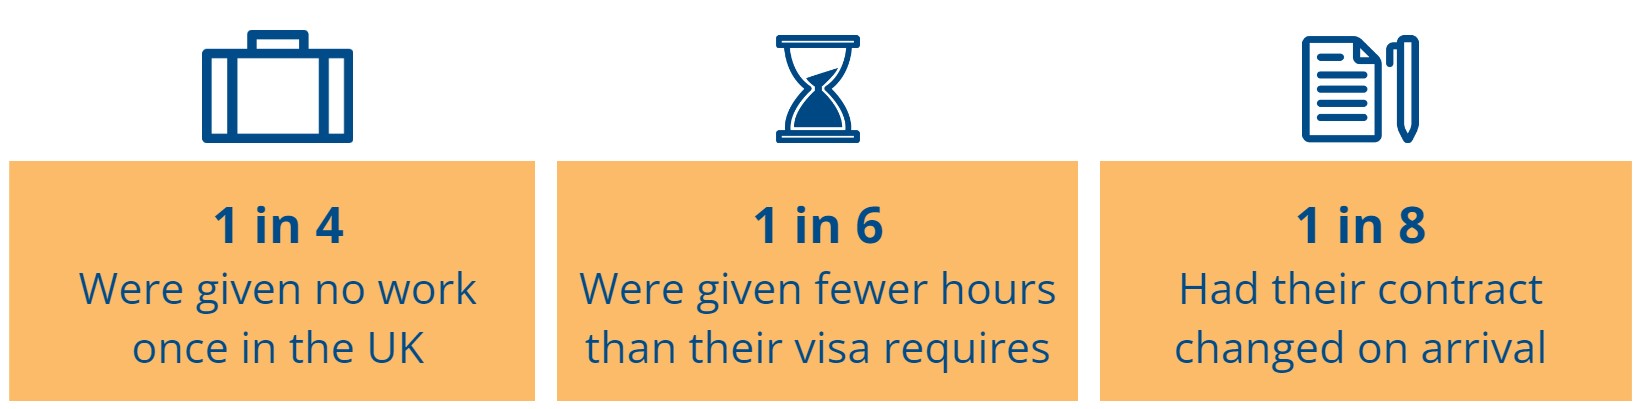 1 in 4 were given no work once in the UK, 1 in 6 were given fewer hours than their visa requires, 1 in 8 had their contract changed on arrival